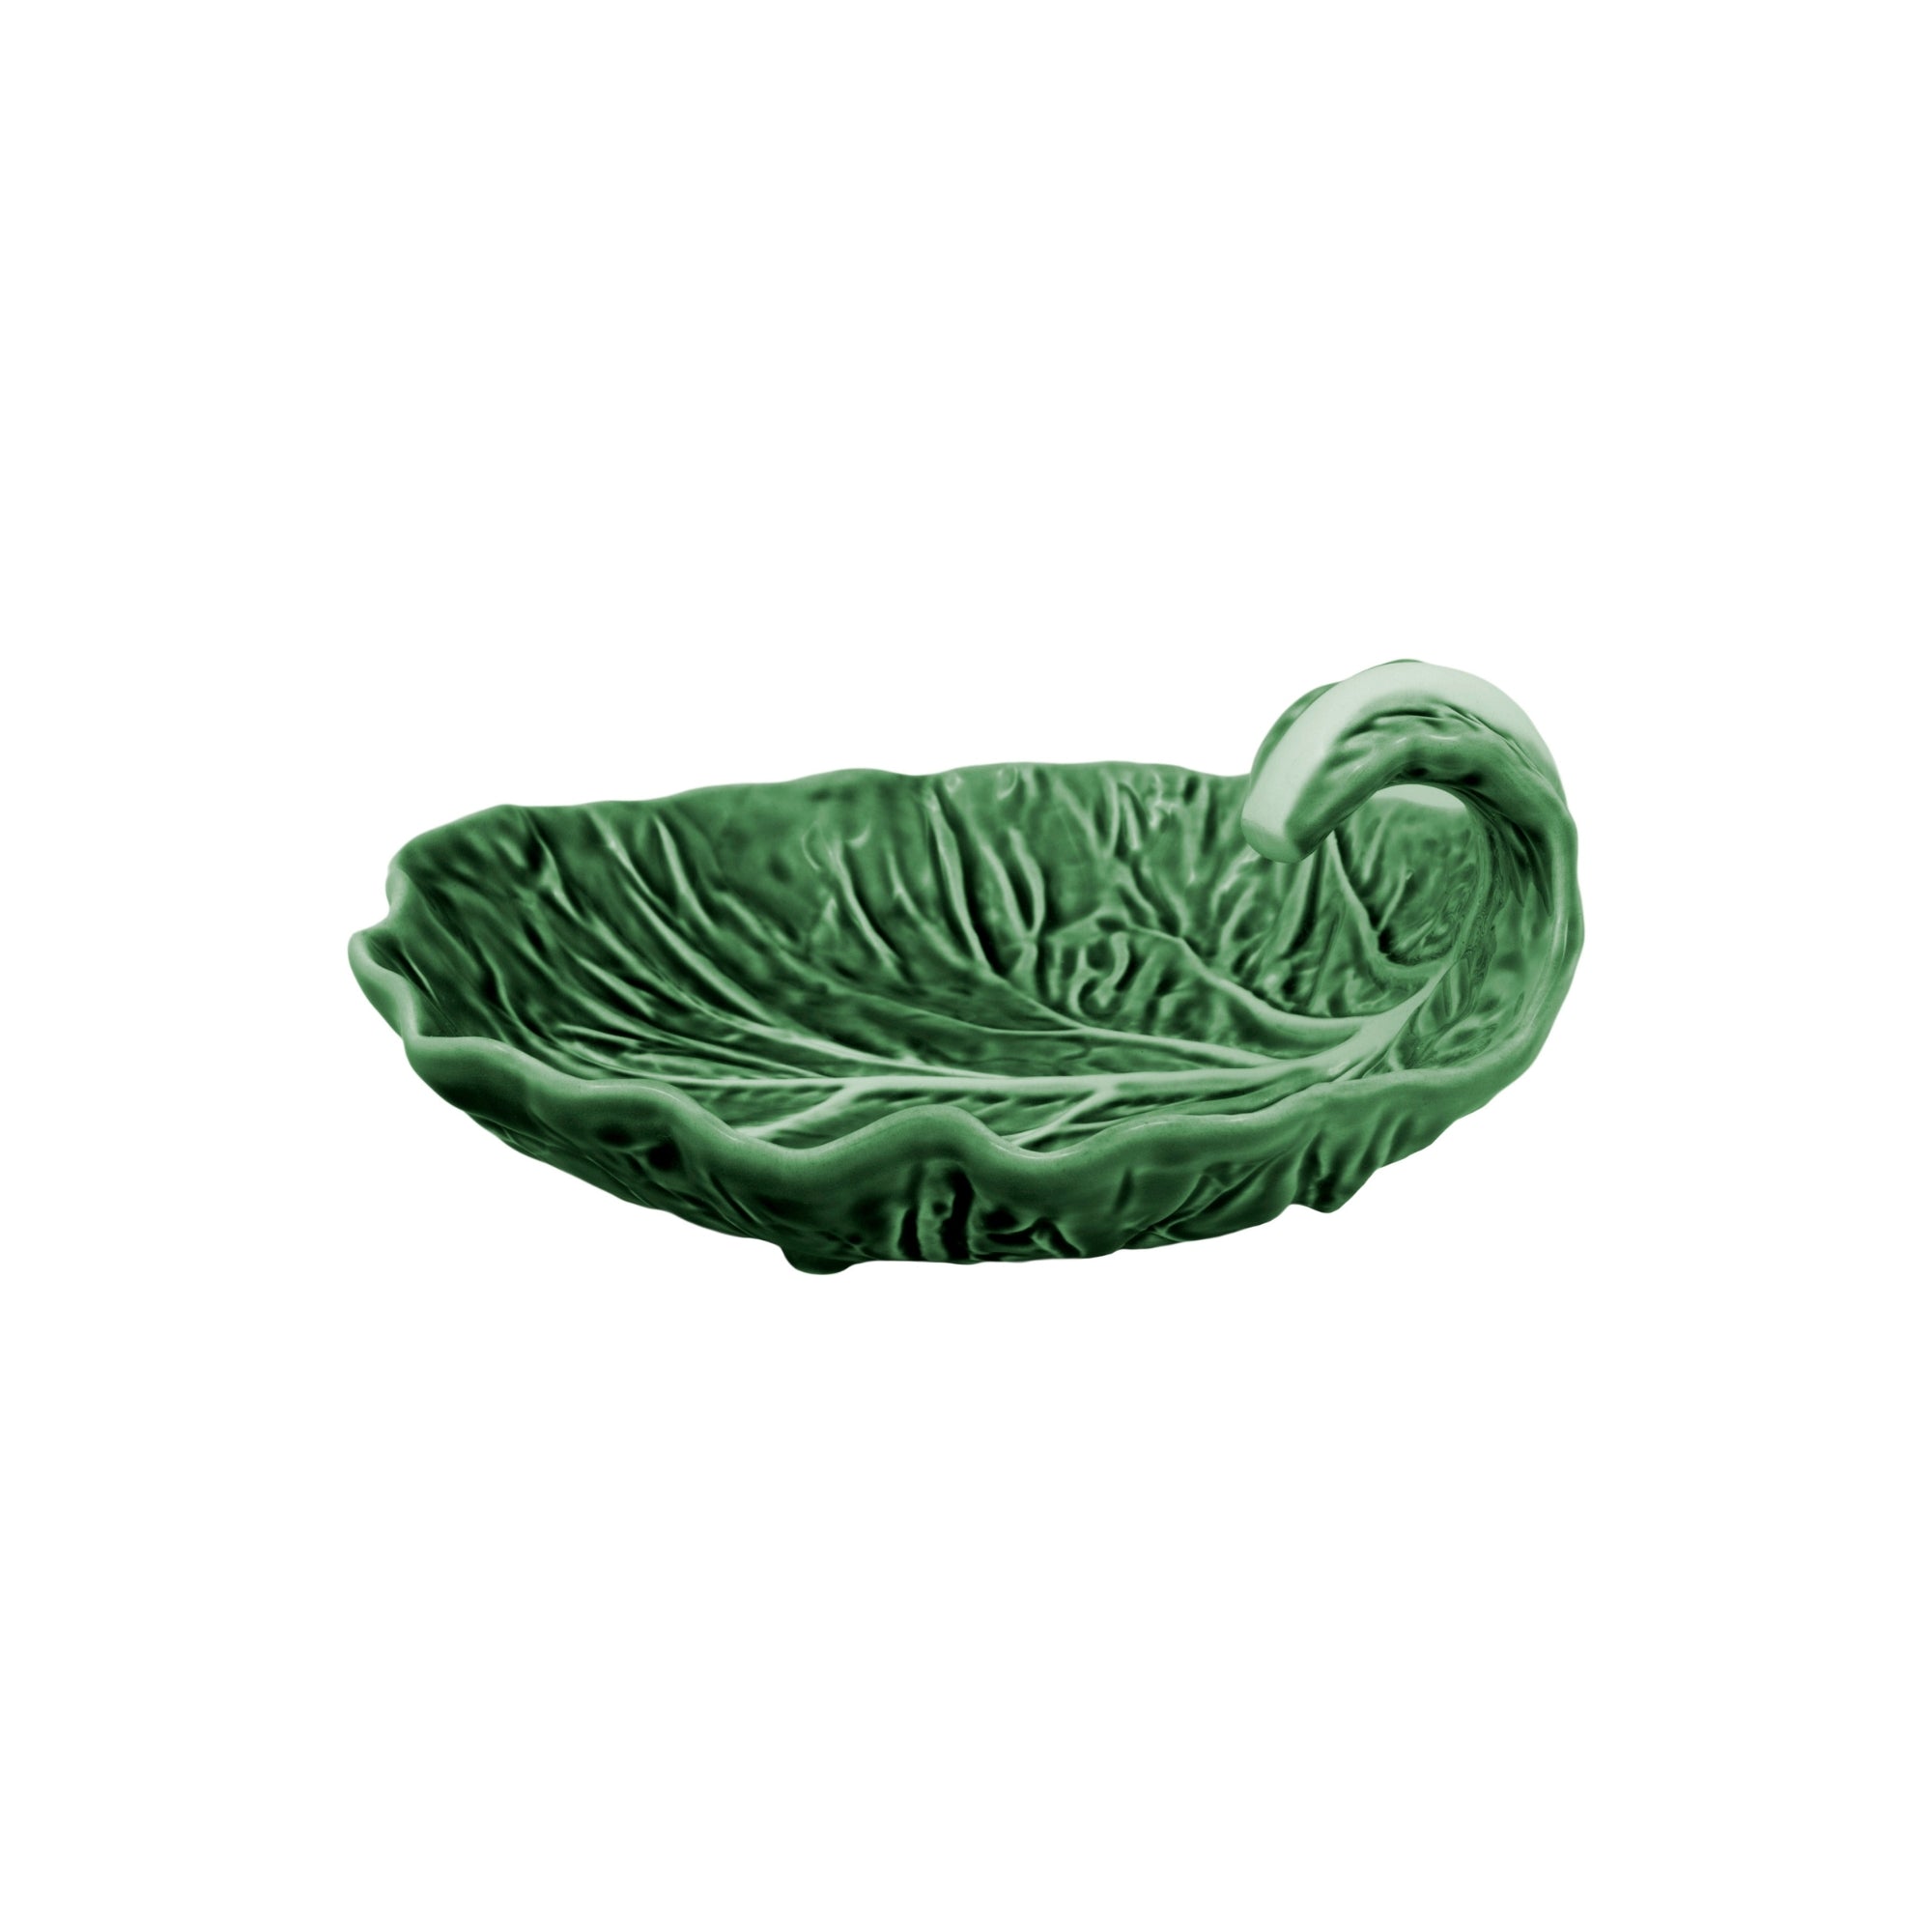 Bordallo Pinheiro Cabbage - Leaf tray with curvature